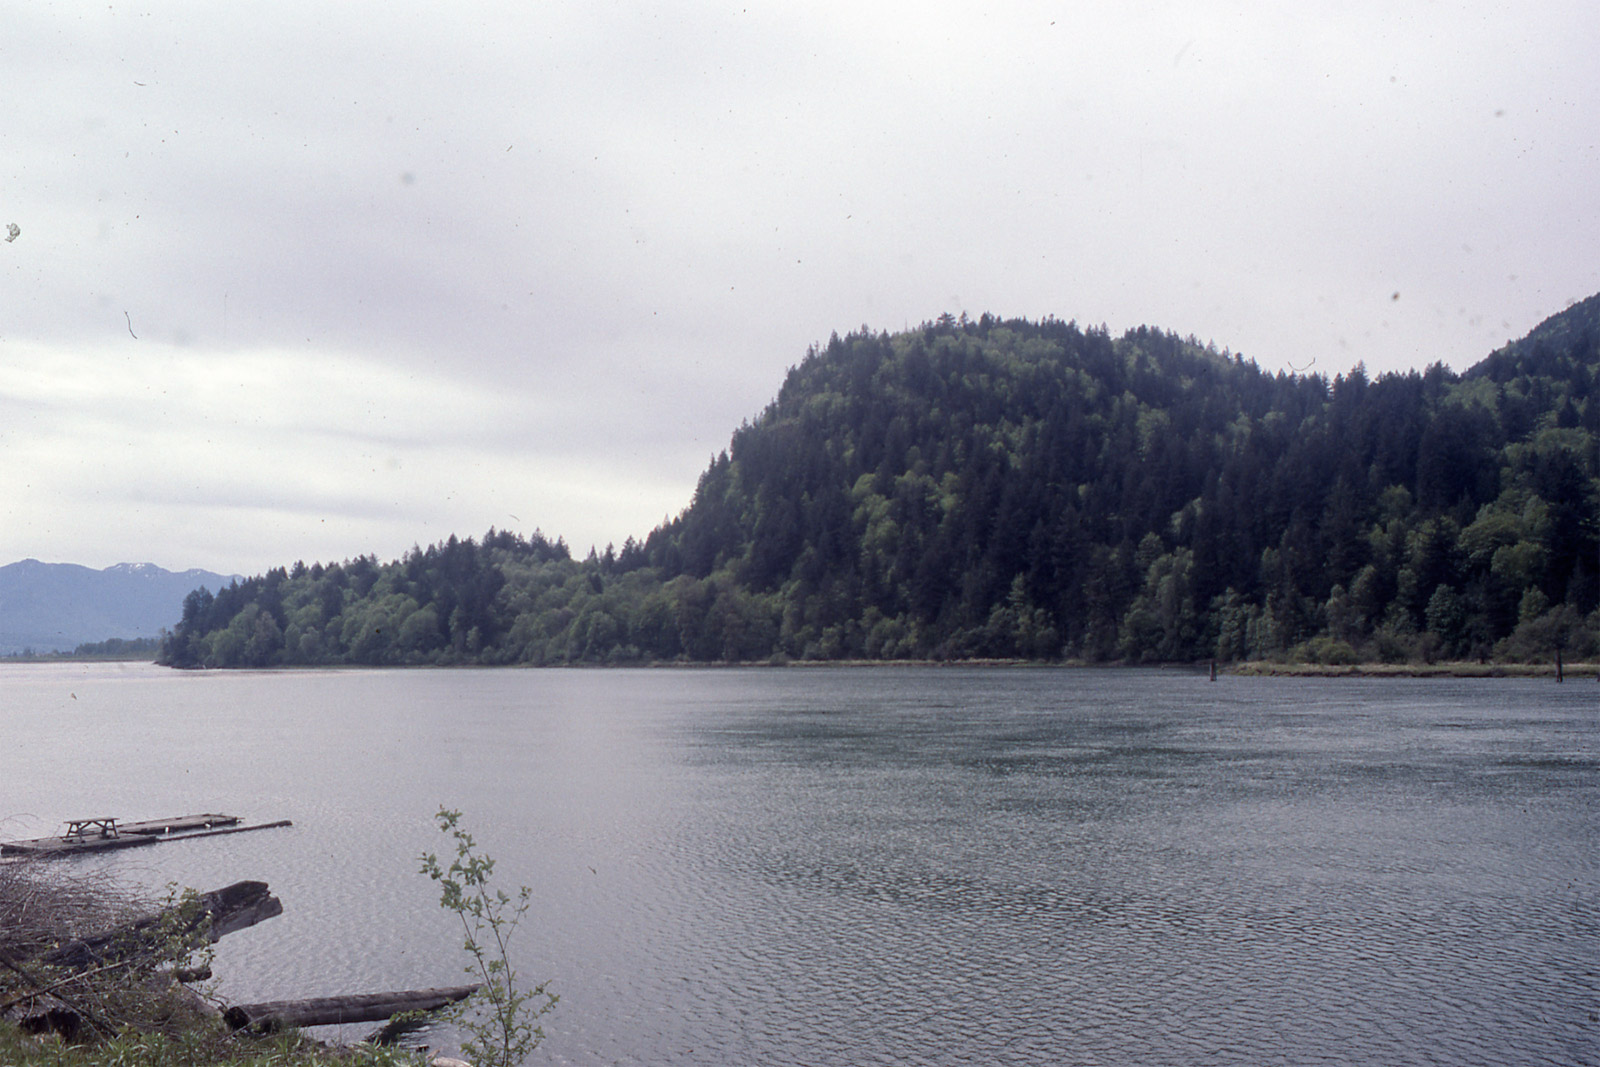 A grey river in the foreground with a hill in profile across the water, low and then rising to a hump